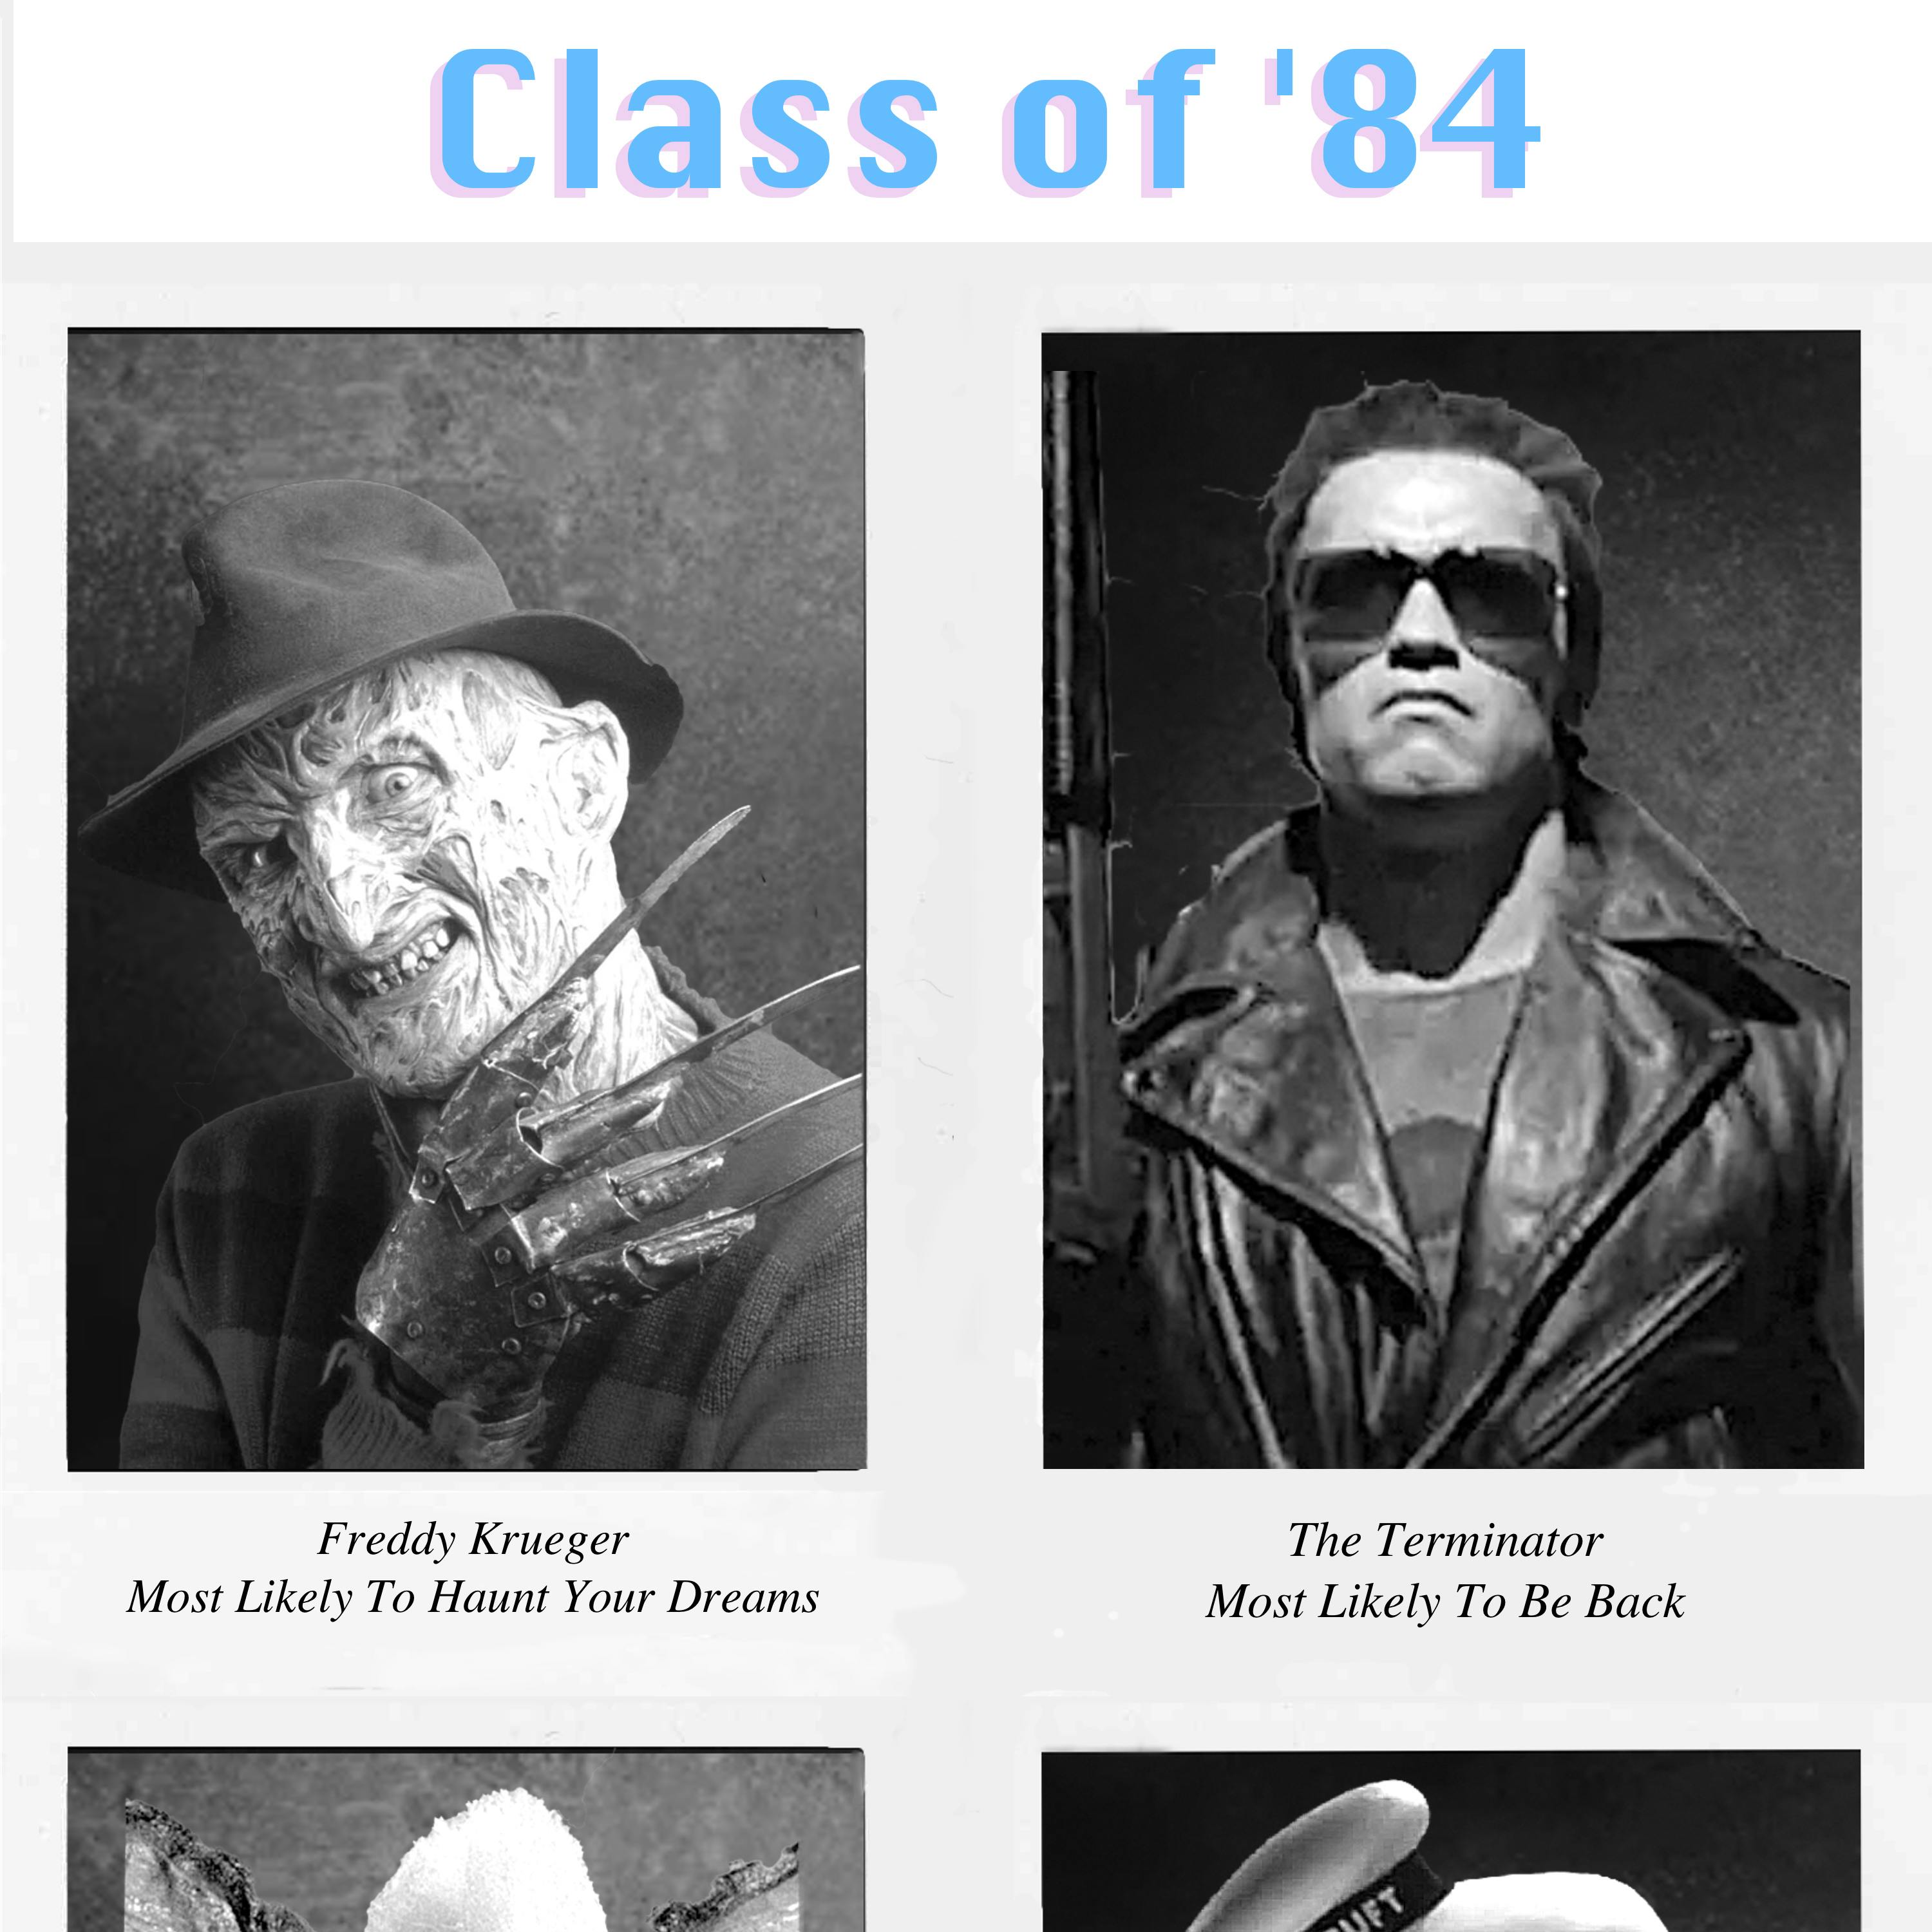 Class of '84: Rise of The Villains